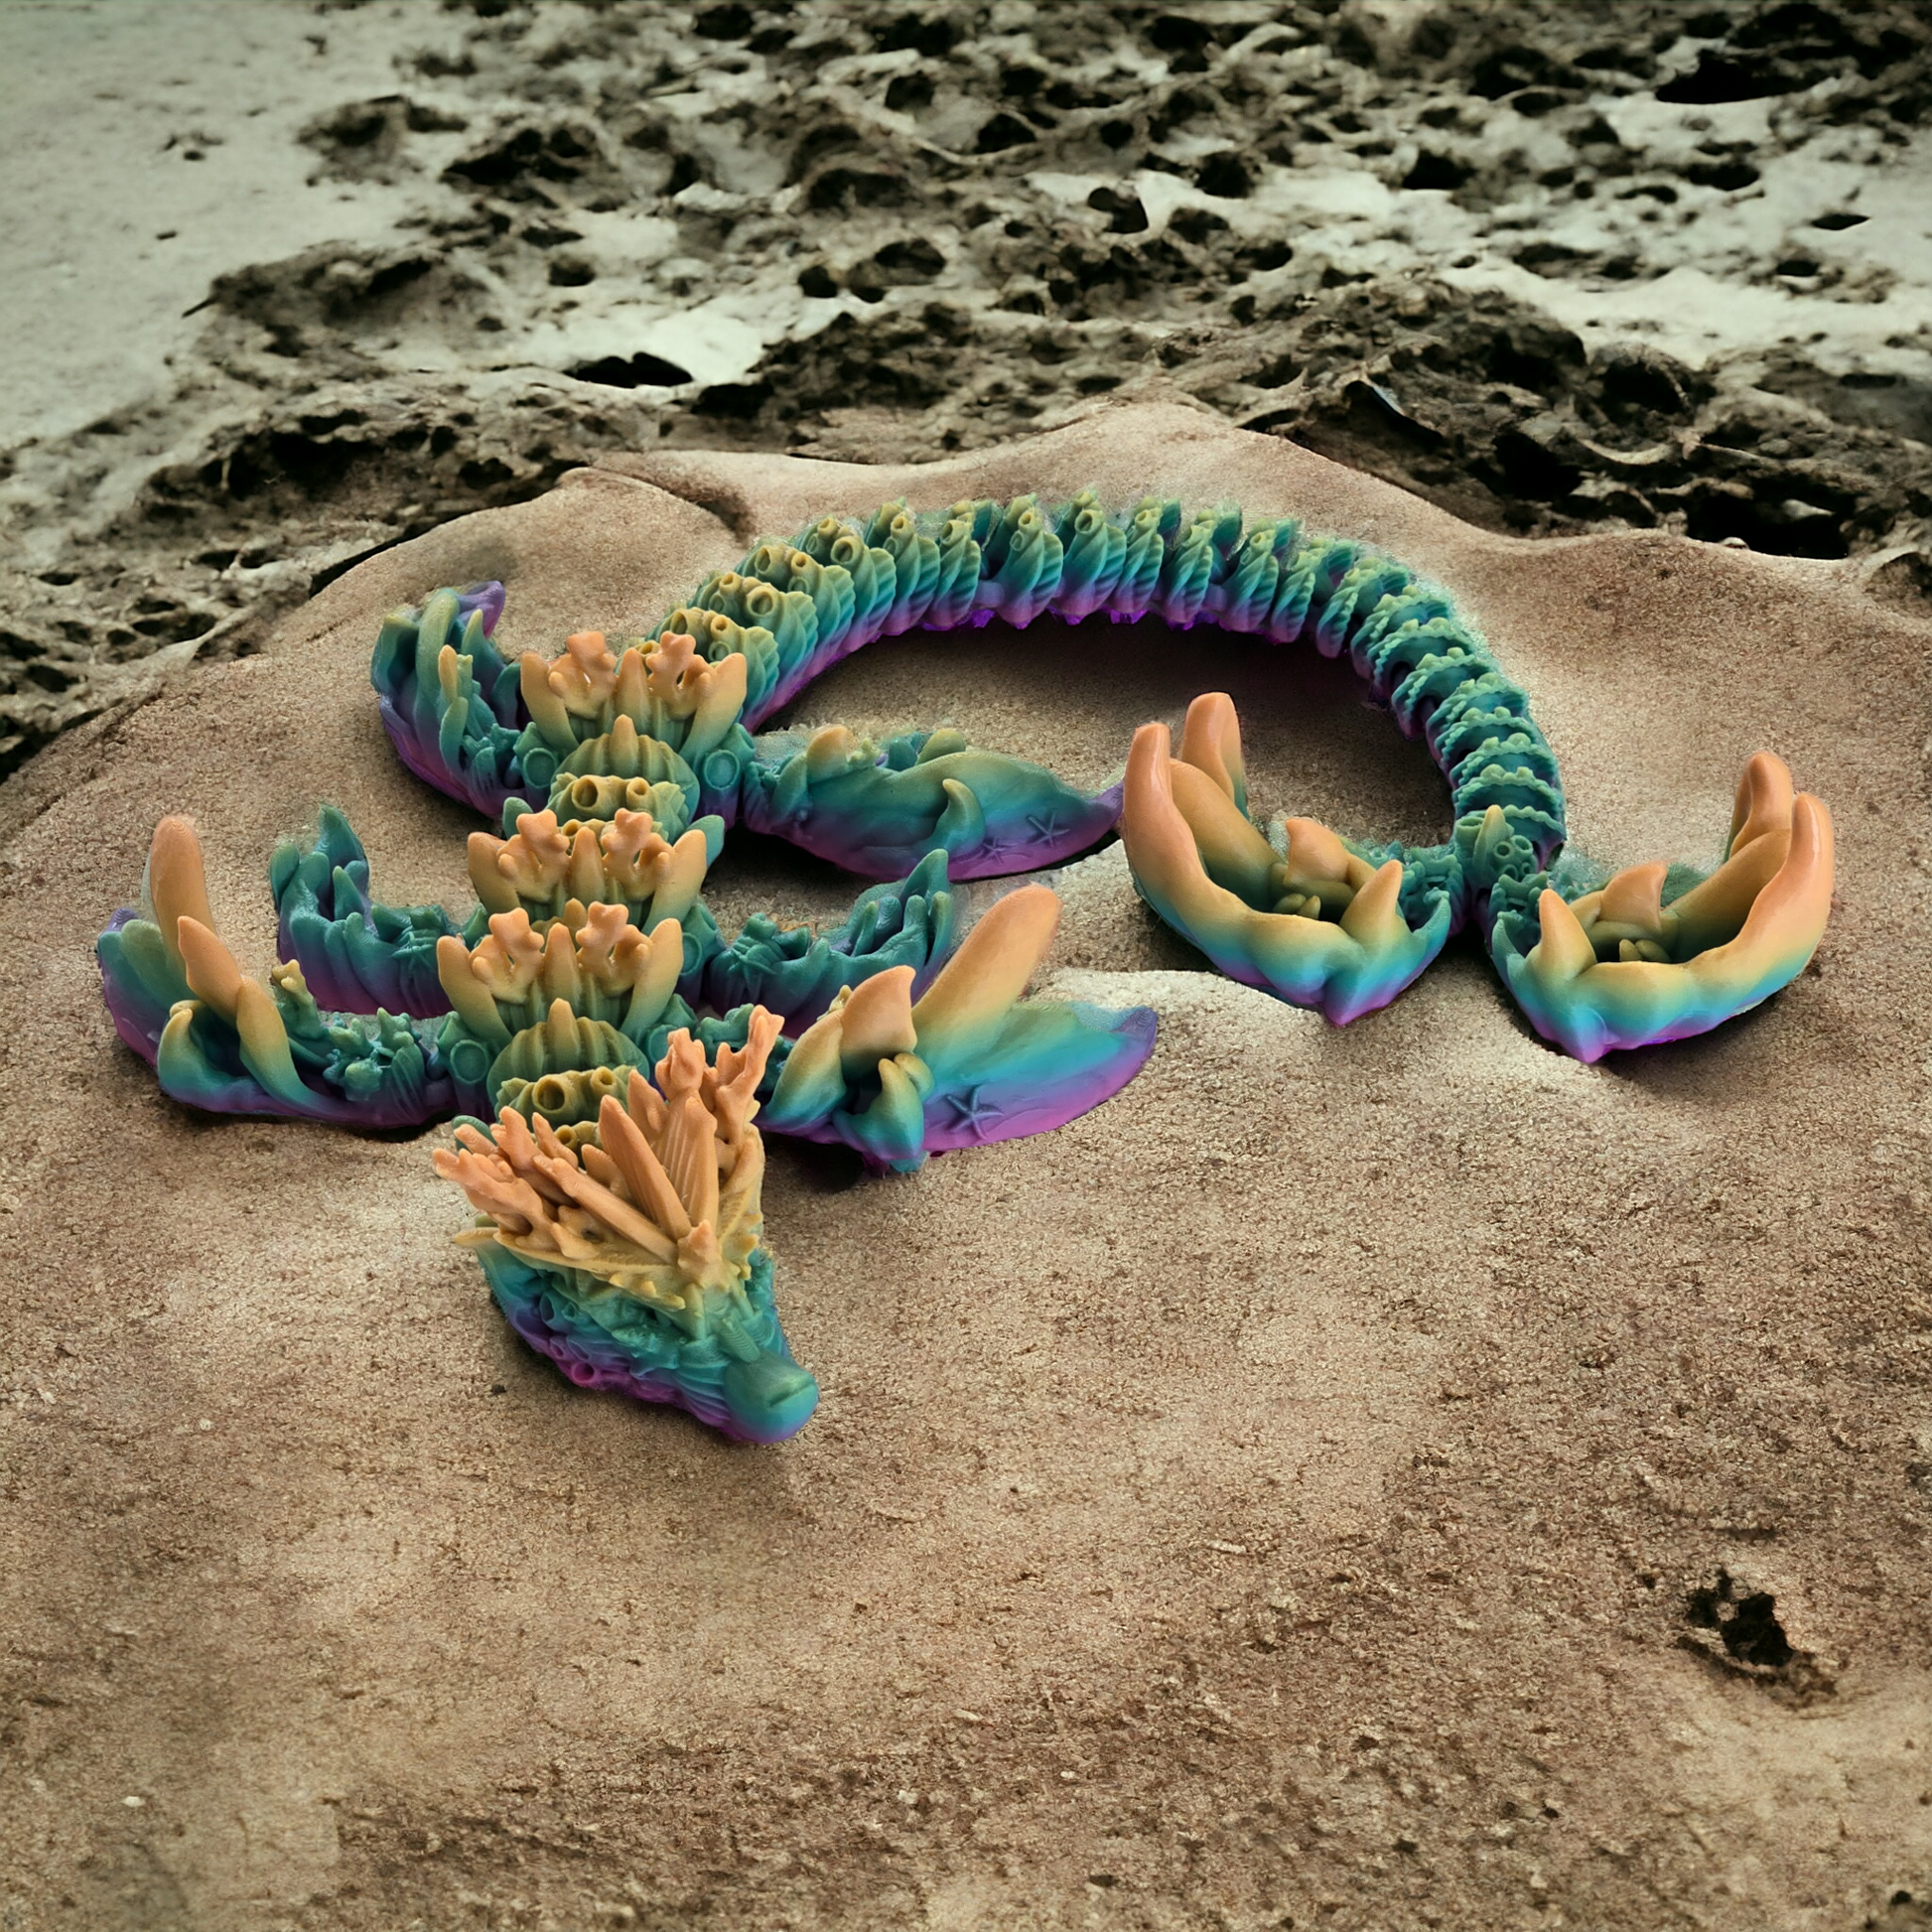 Flexi Coral Dragon resting on the beach